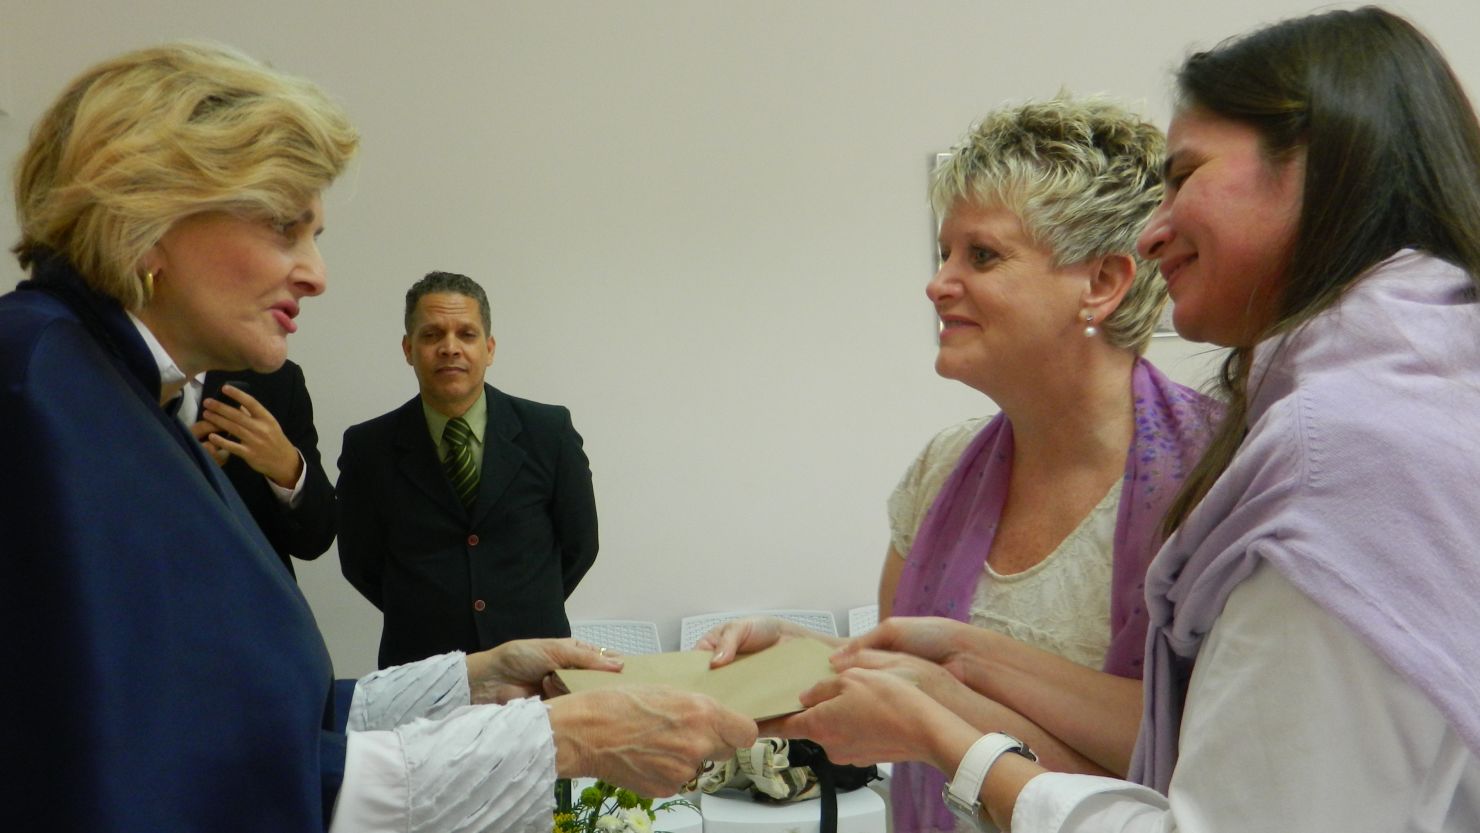 Claudia Amaral, right, and Melani Servetas were married in Brazil at the same time the Supreme Court was ruling on DOMA.